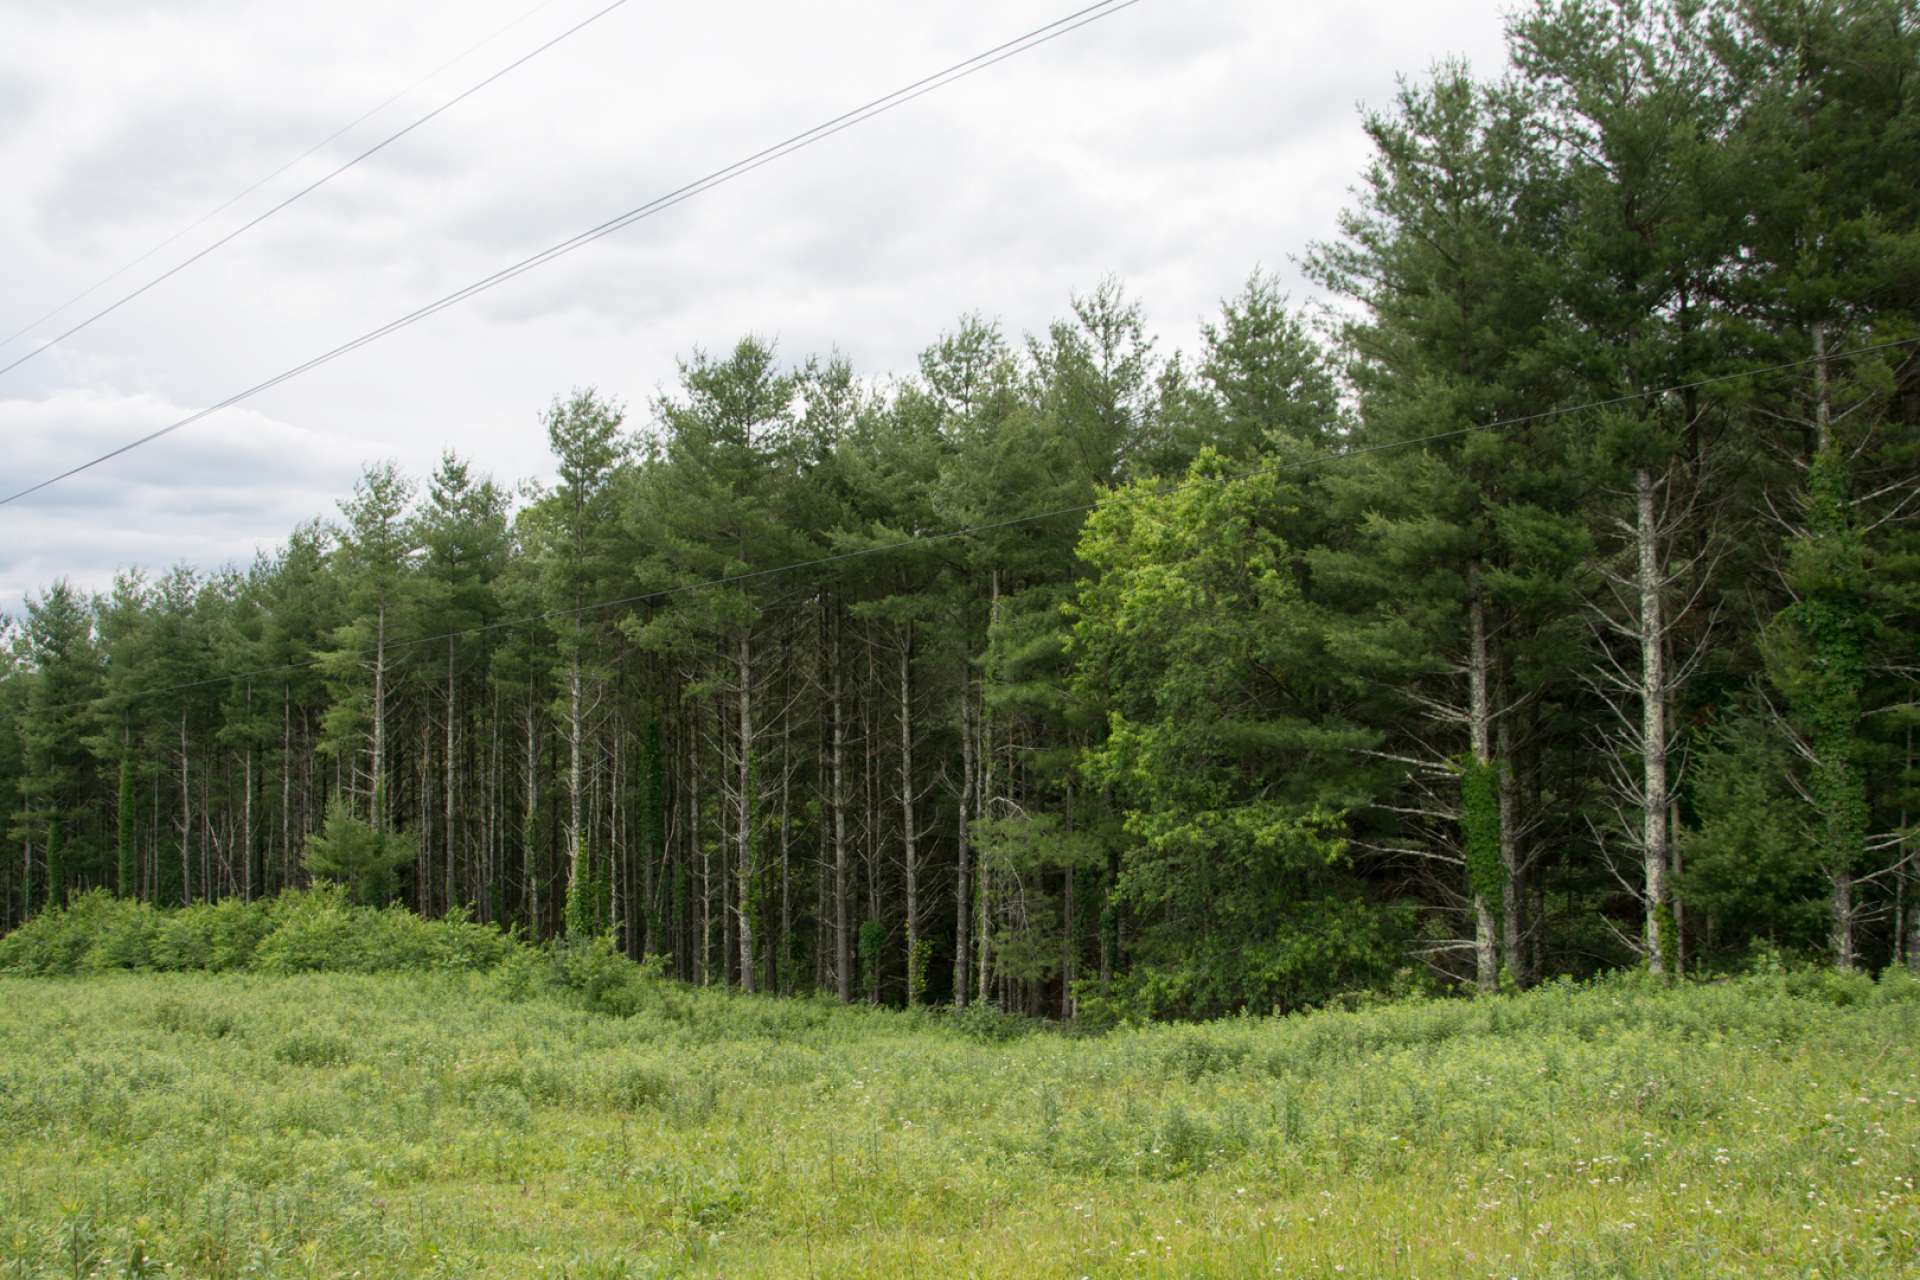 In addition to lush pastures, there is a diverse mixture of native hardwoods and mature pine forest providing timber potential.